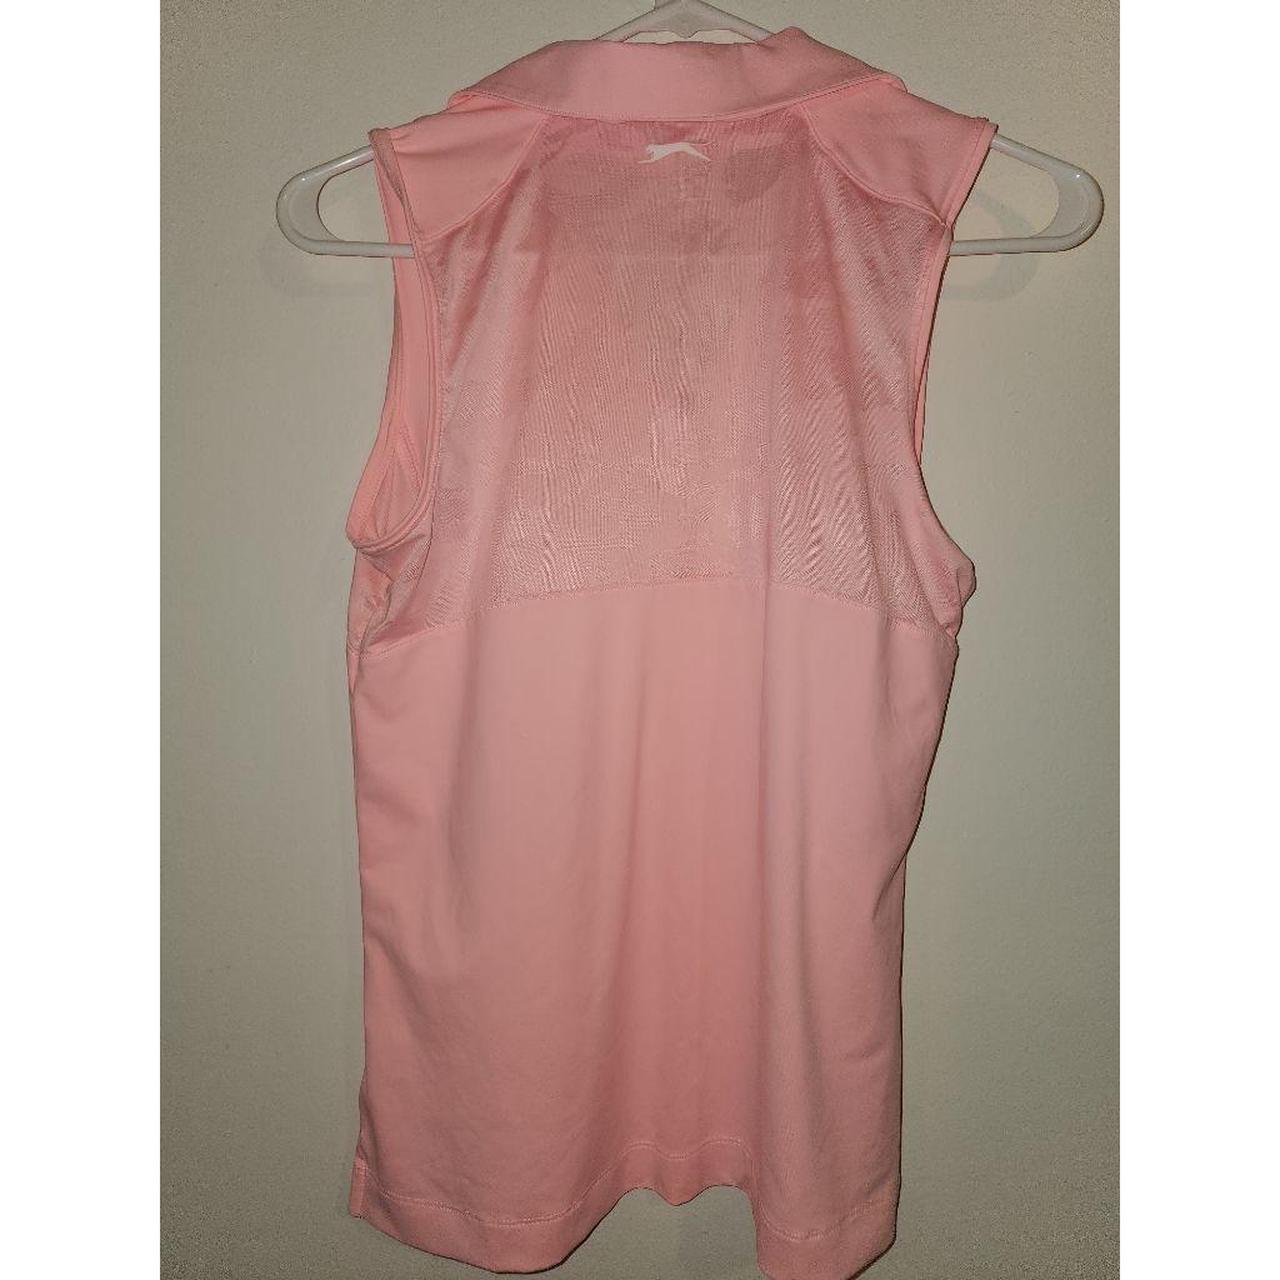 Product Image 4 - Pink
Small 
Buttons down front
Super soft
Collar